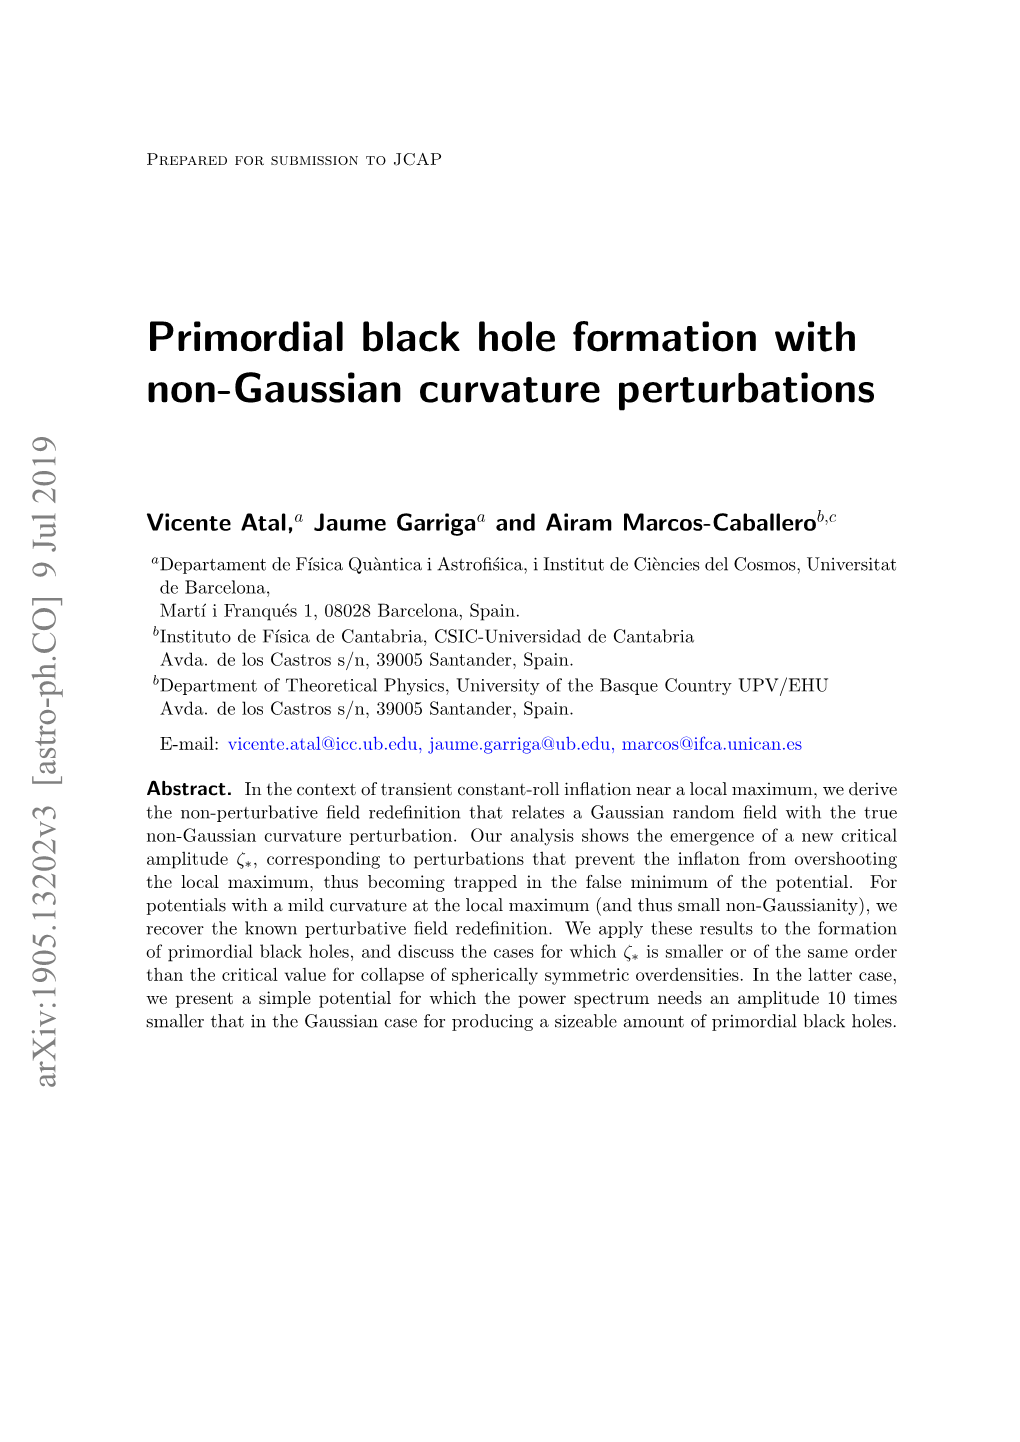 Primordial Black Hole Formation with Non-Gaussian Curvature Perturbations